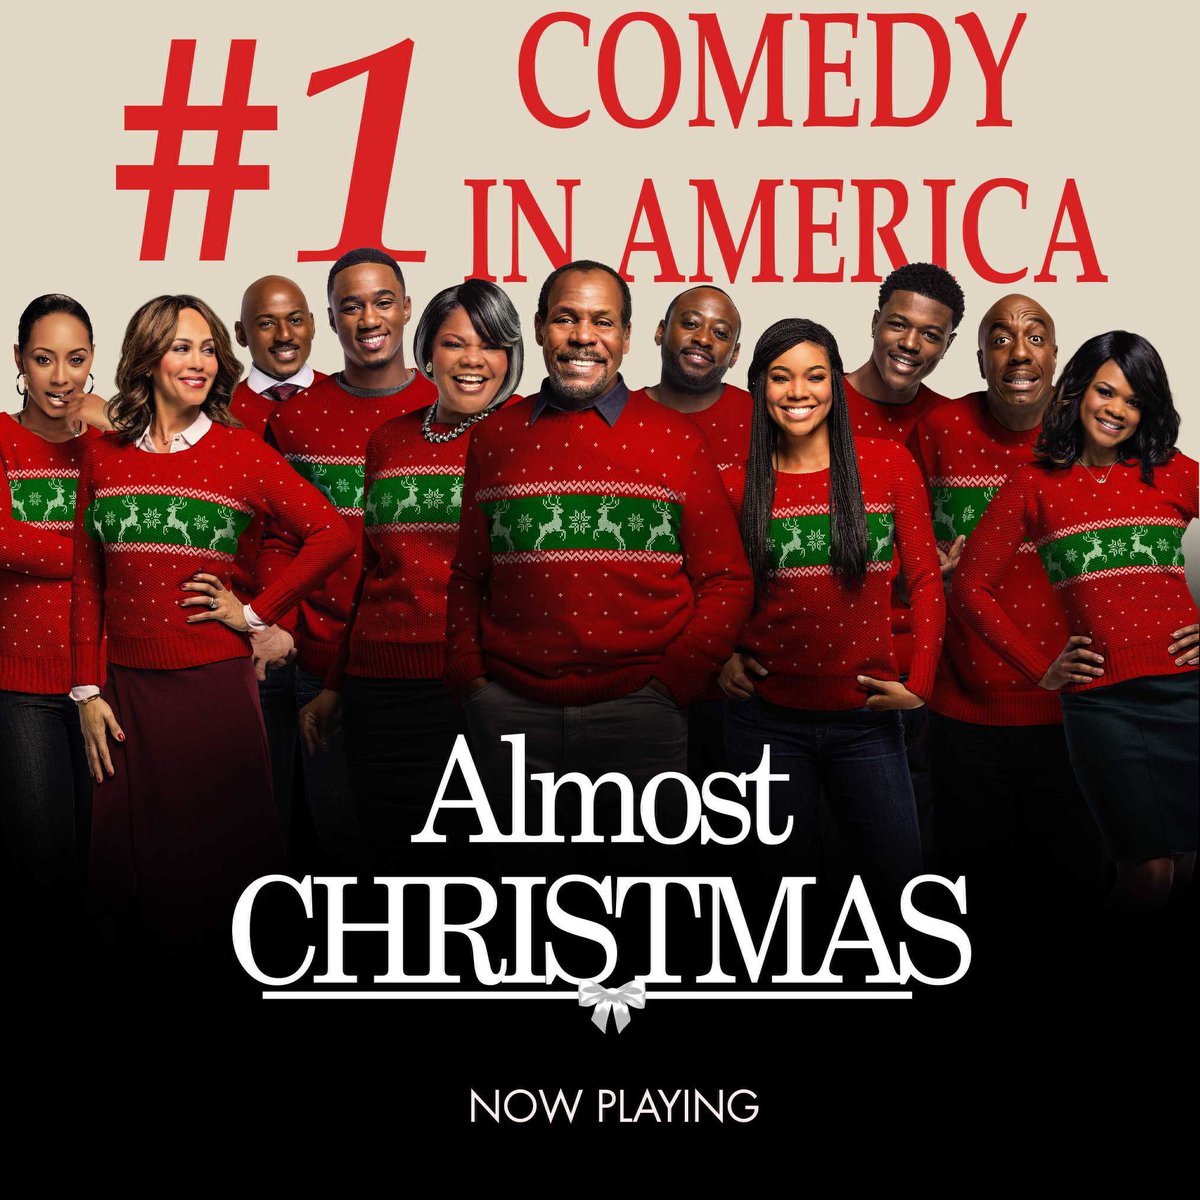 So cool!! So grateful. ????????

Trust me when I say, you're gonna LOVE @AlmostChristmas!! ❤️????❤️ https://t.co/krCeEXKuEg